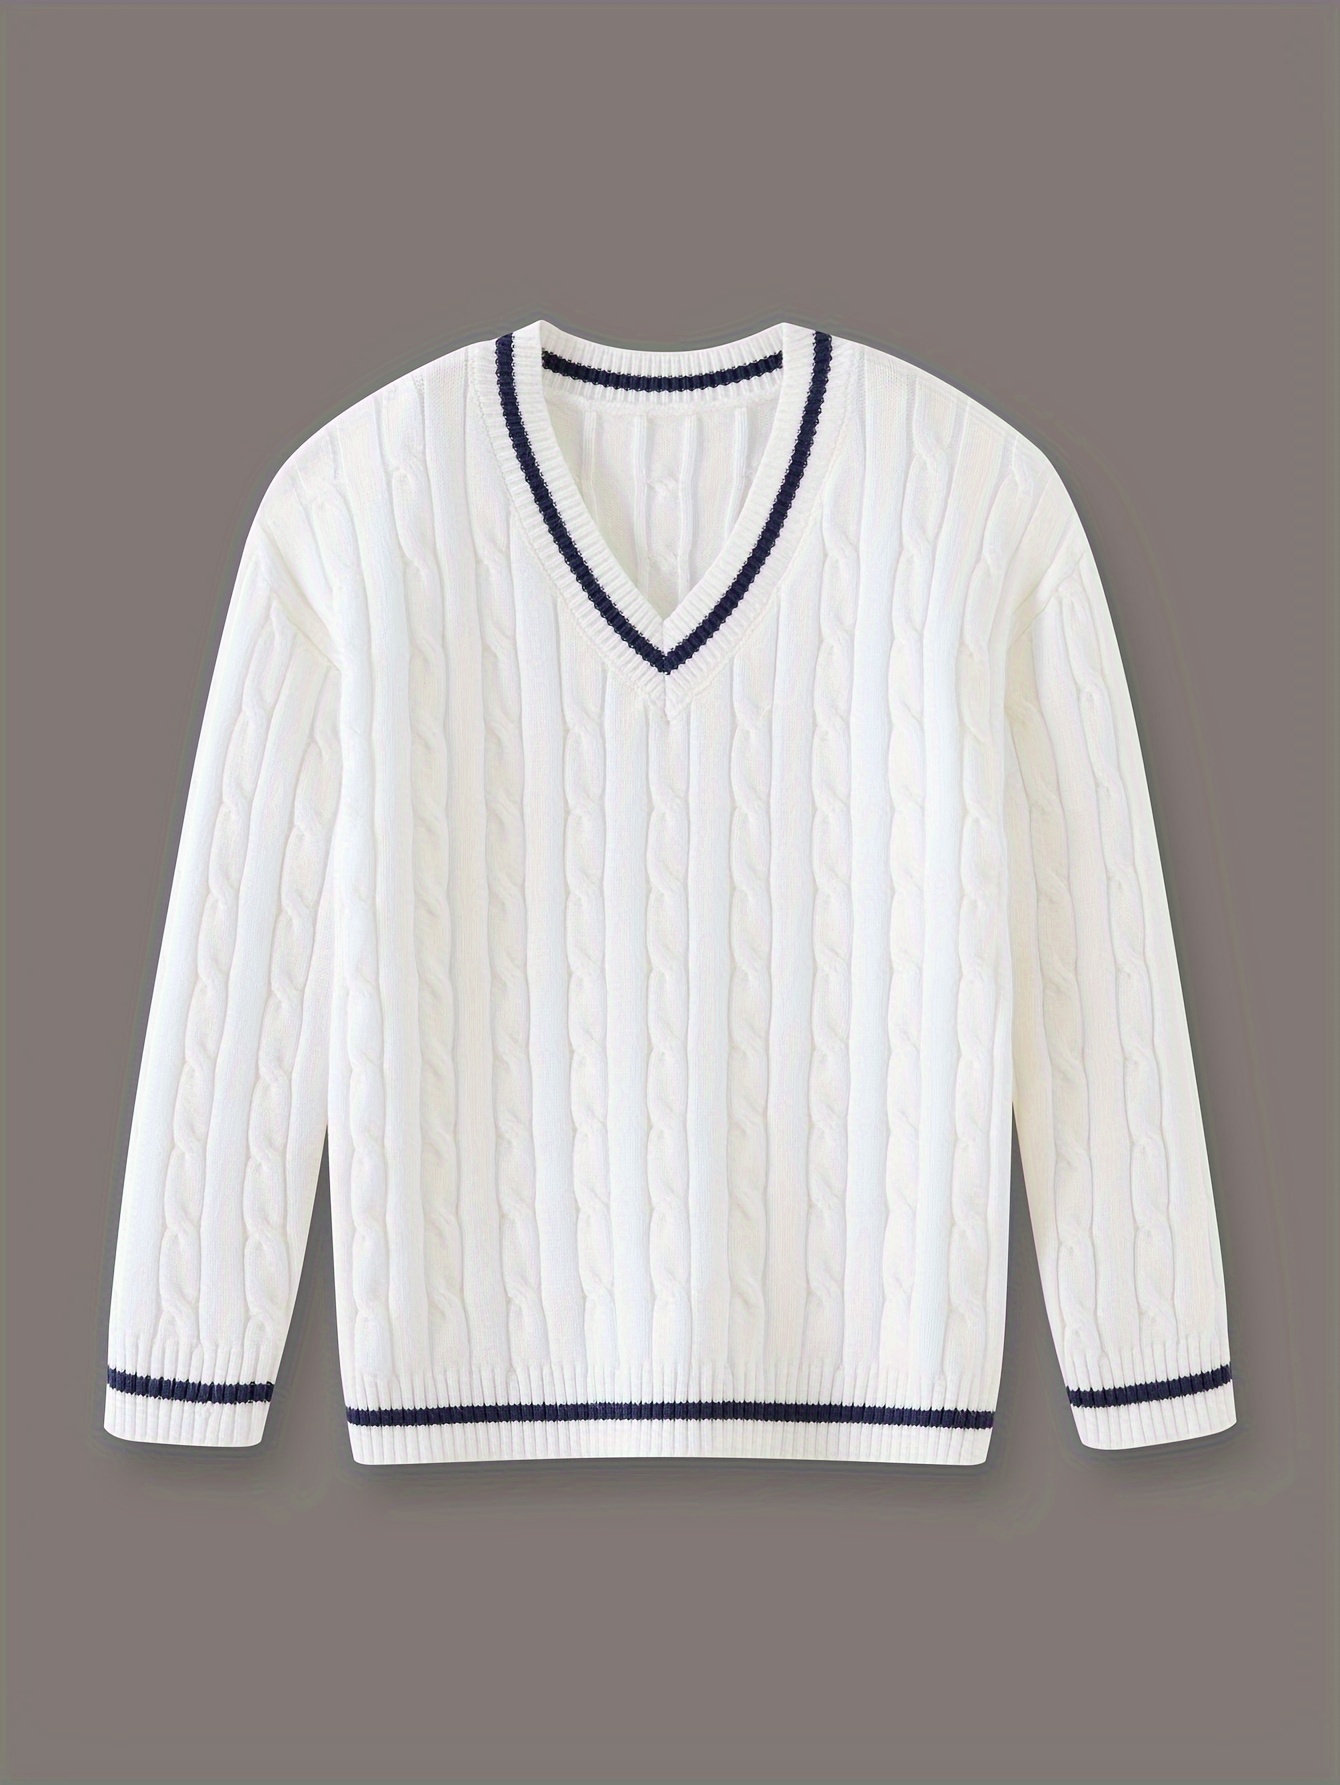 Kid's Preppy Style V-neck Sweater, Cable Knit Pullover, Causal